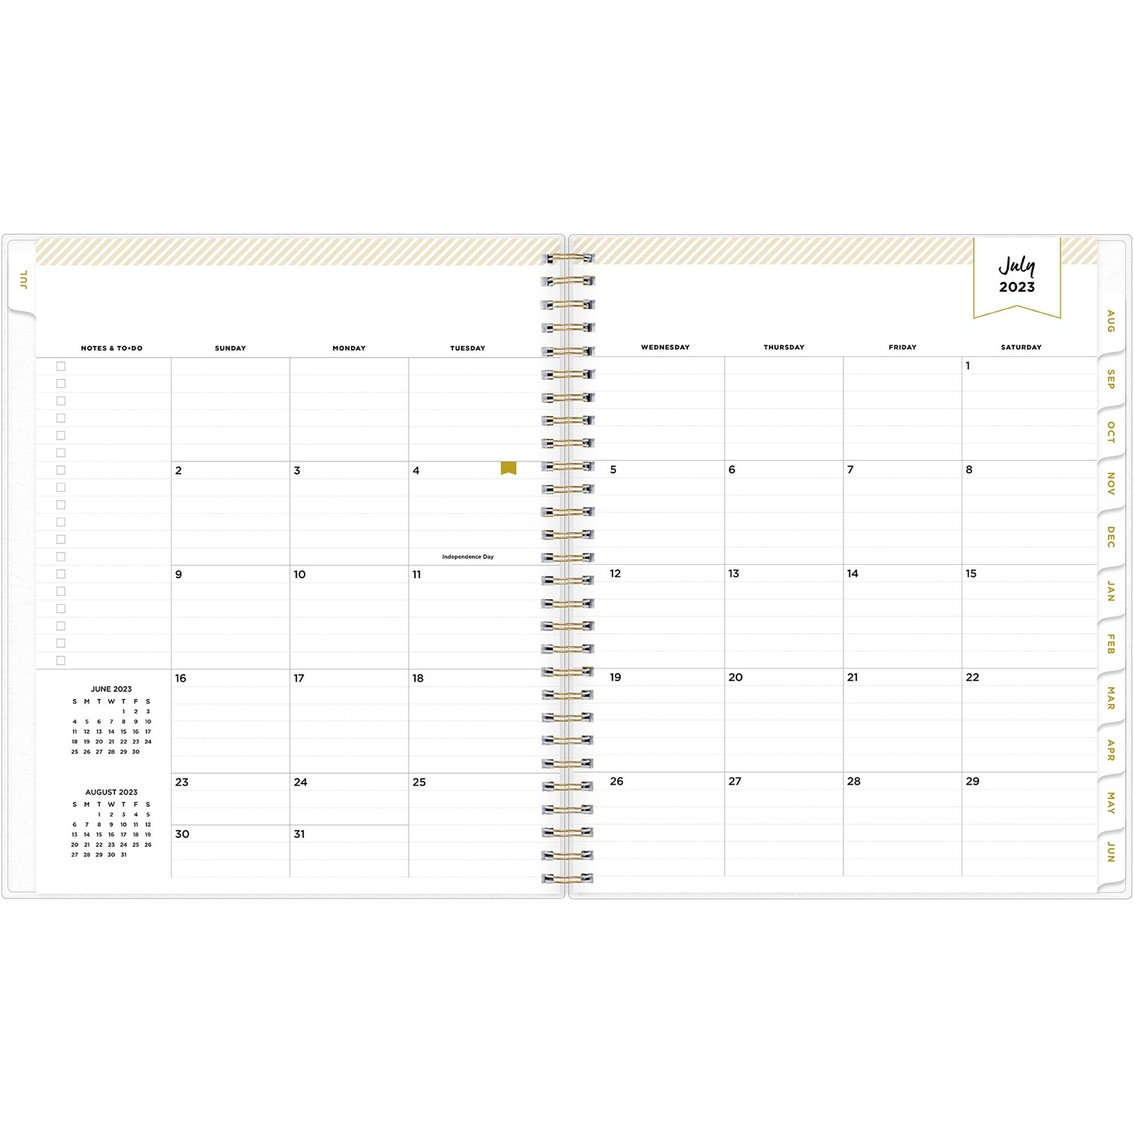 Bluesky Rugby Stripe Black Frosted Planning Calendar Daily/Monthly 8 x 10 in. - Image 2 of 3